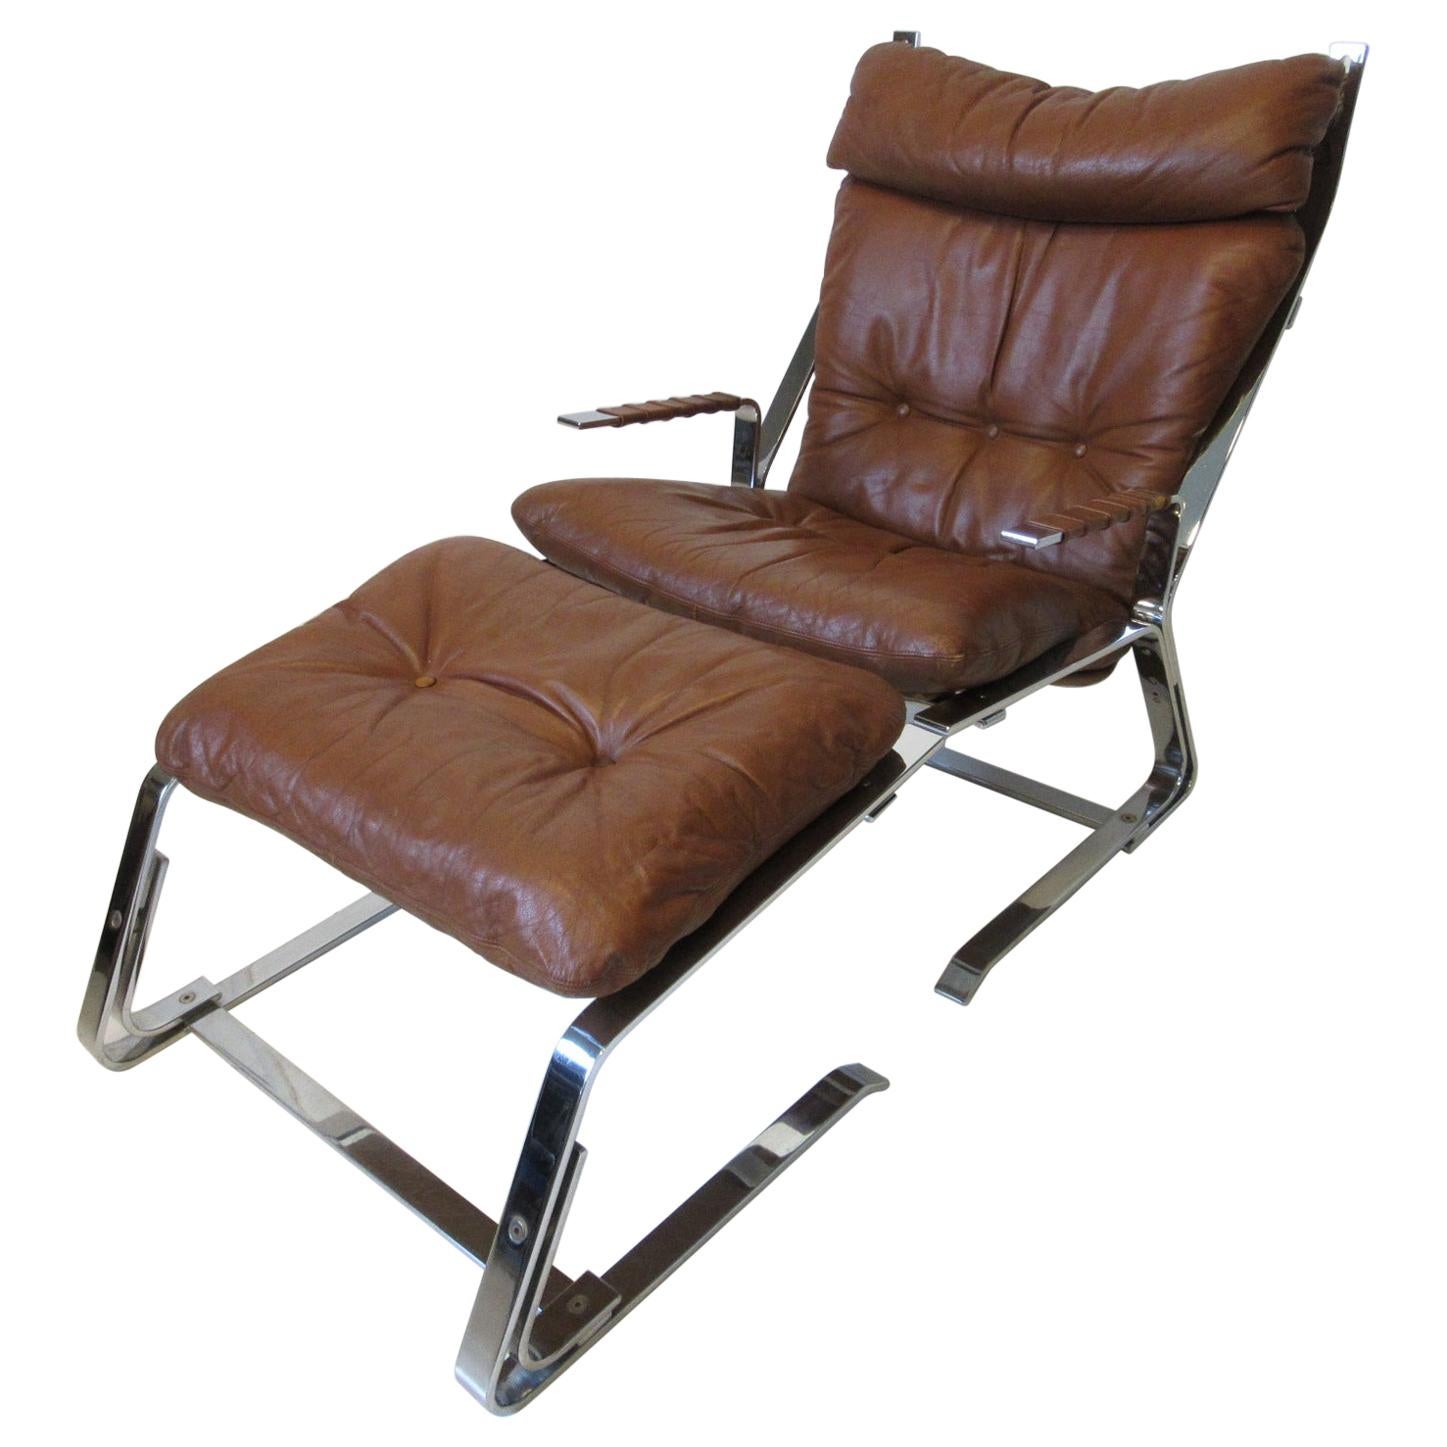 Elia & Nordahl Solheim Leather and Chrome Lounge Chair w/ Ottoman Norway